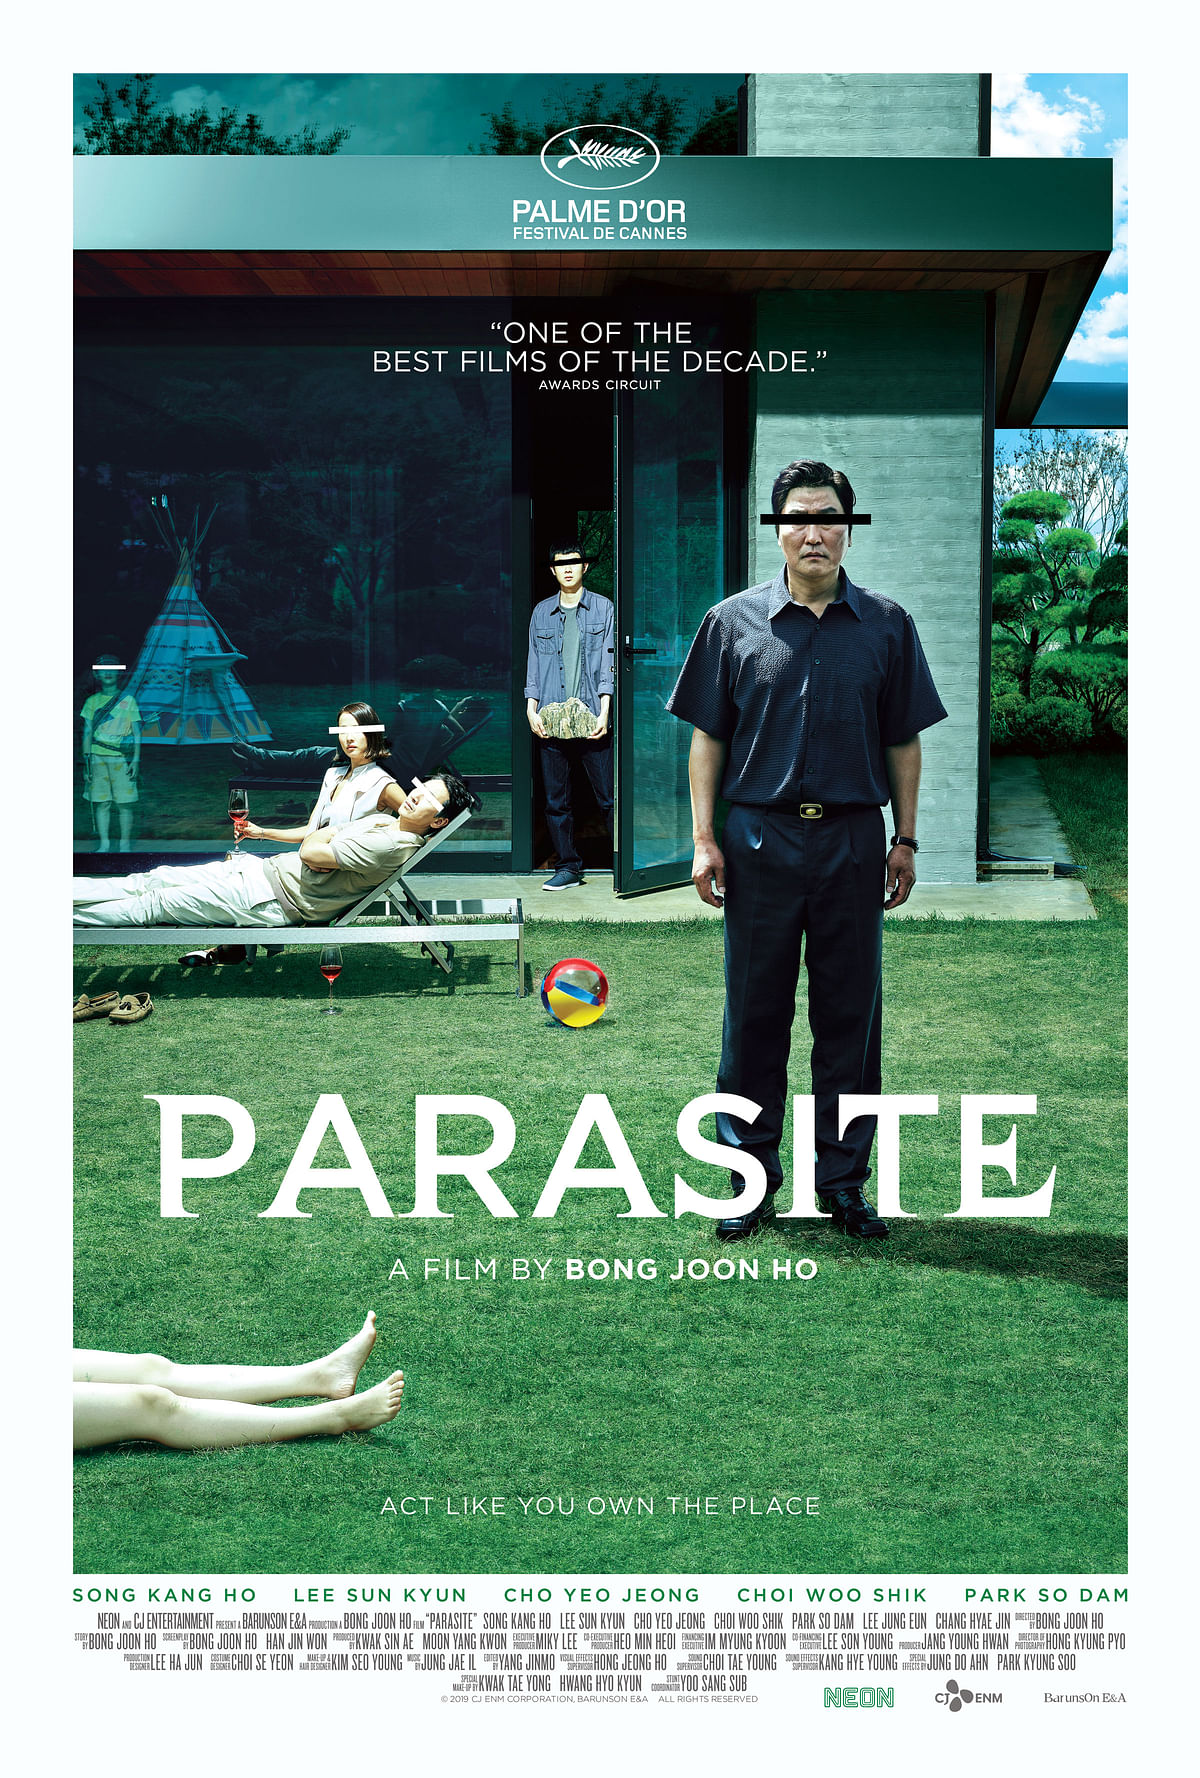 ‘Parasite’ is directed by Bong Joon-Ho.